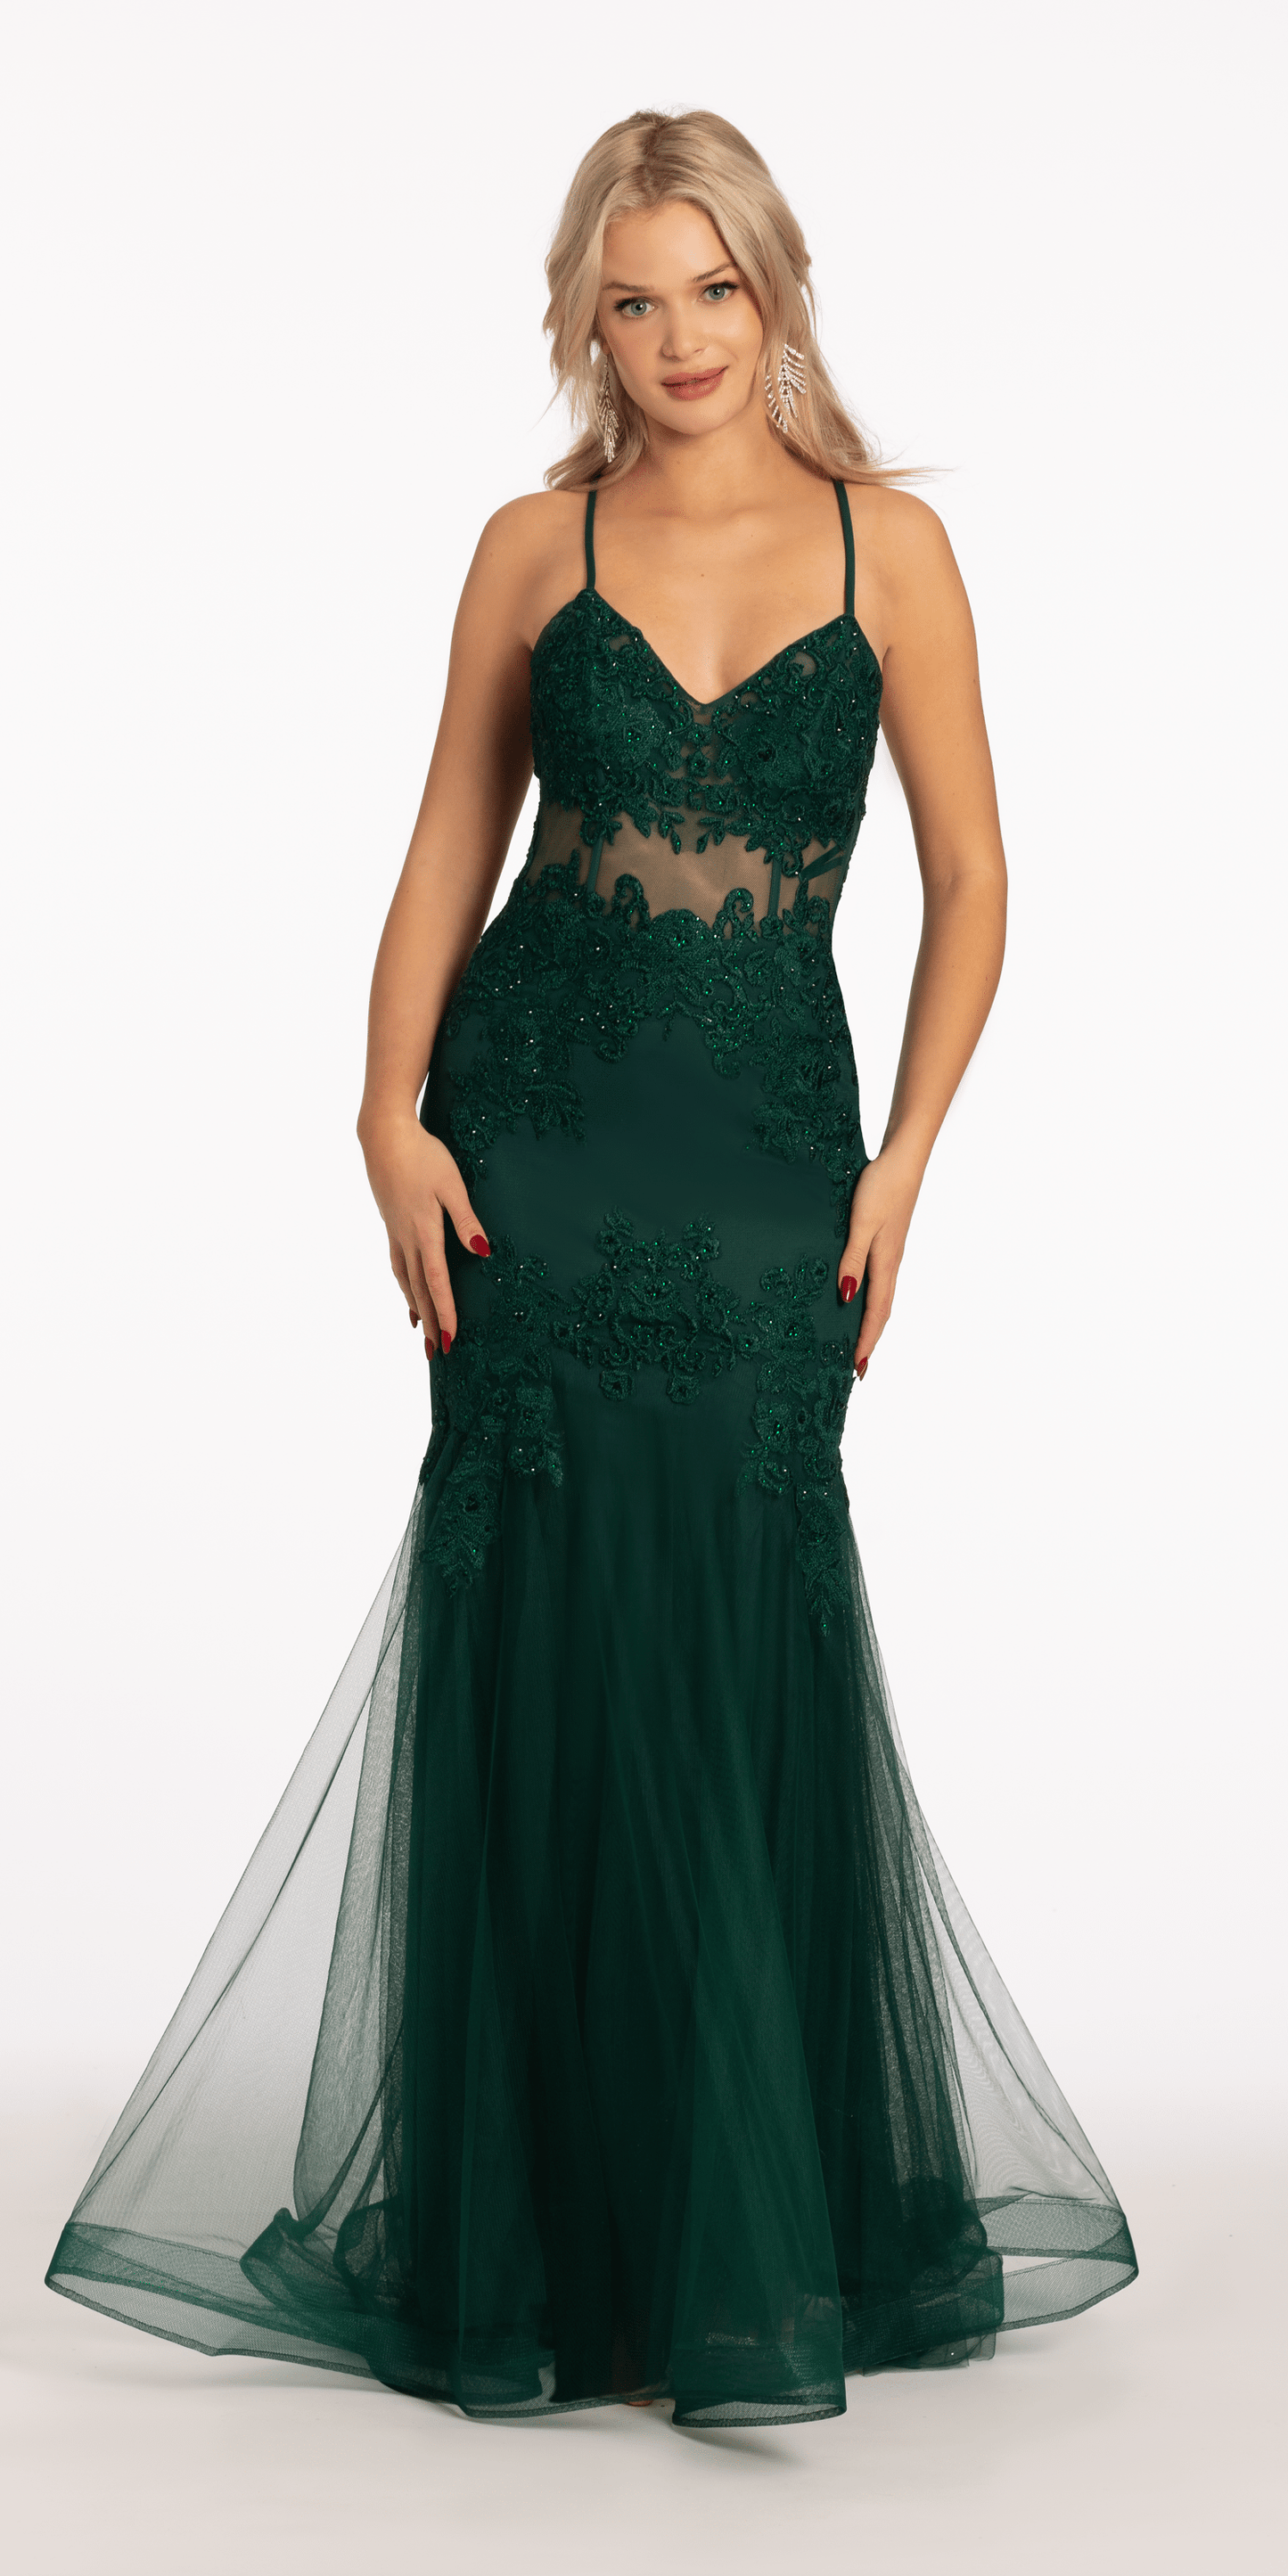 Camille La Vie Lace Up Illusion Corset Mermaid Dress with Embellished Appliques missy / 2 / hunter-green